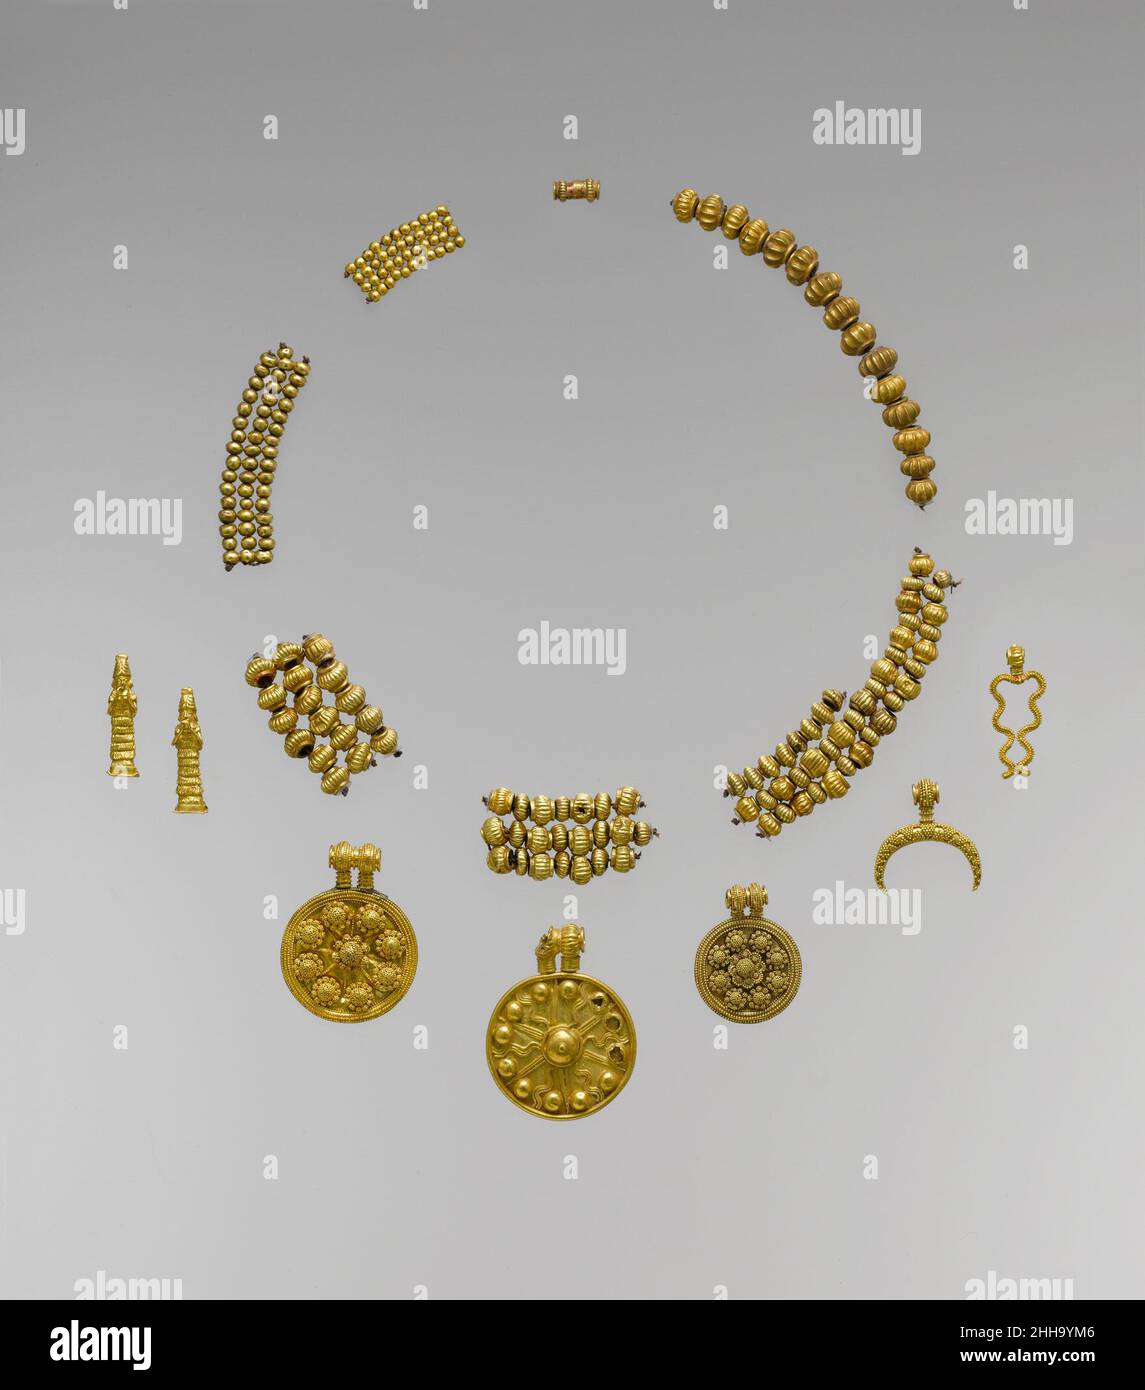 Necklace pendants and beads ca. 18th–17th century B.C. Babylonian These gold pendants and beads exemplify the finest craftsmanship in gold from the ancient Near East, and each represents a deity or the symbol of a deity. The two female figures, wearing horned headdresses and long flounced dresses, probably represent Lama, a protective goddess; the disk with rays emanating from a central boss represents Shamash, the sun god; and the forked lightning is the symbol for Adad, the storm god. The two disks with granulated rosettes may be symbols of Ishtar, goddess of love and war represented by the Stock Photo